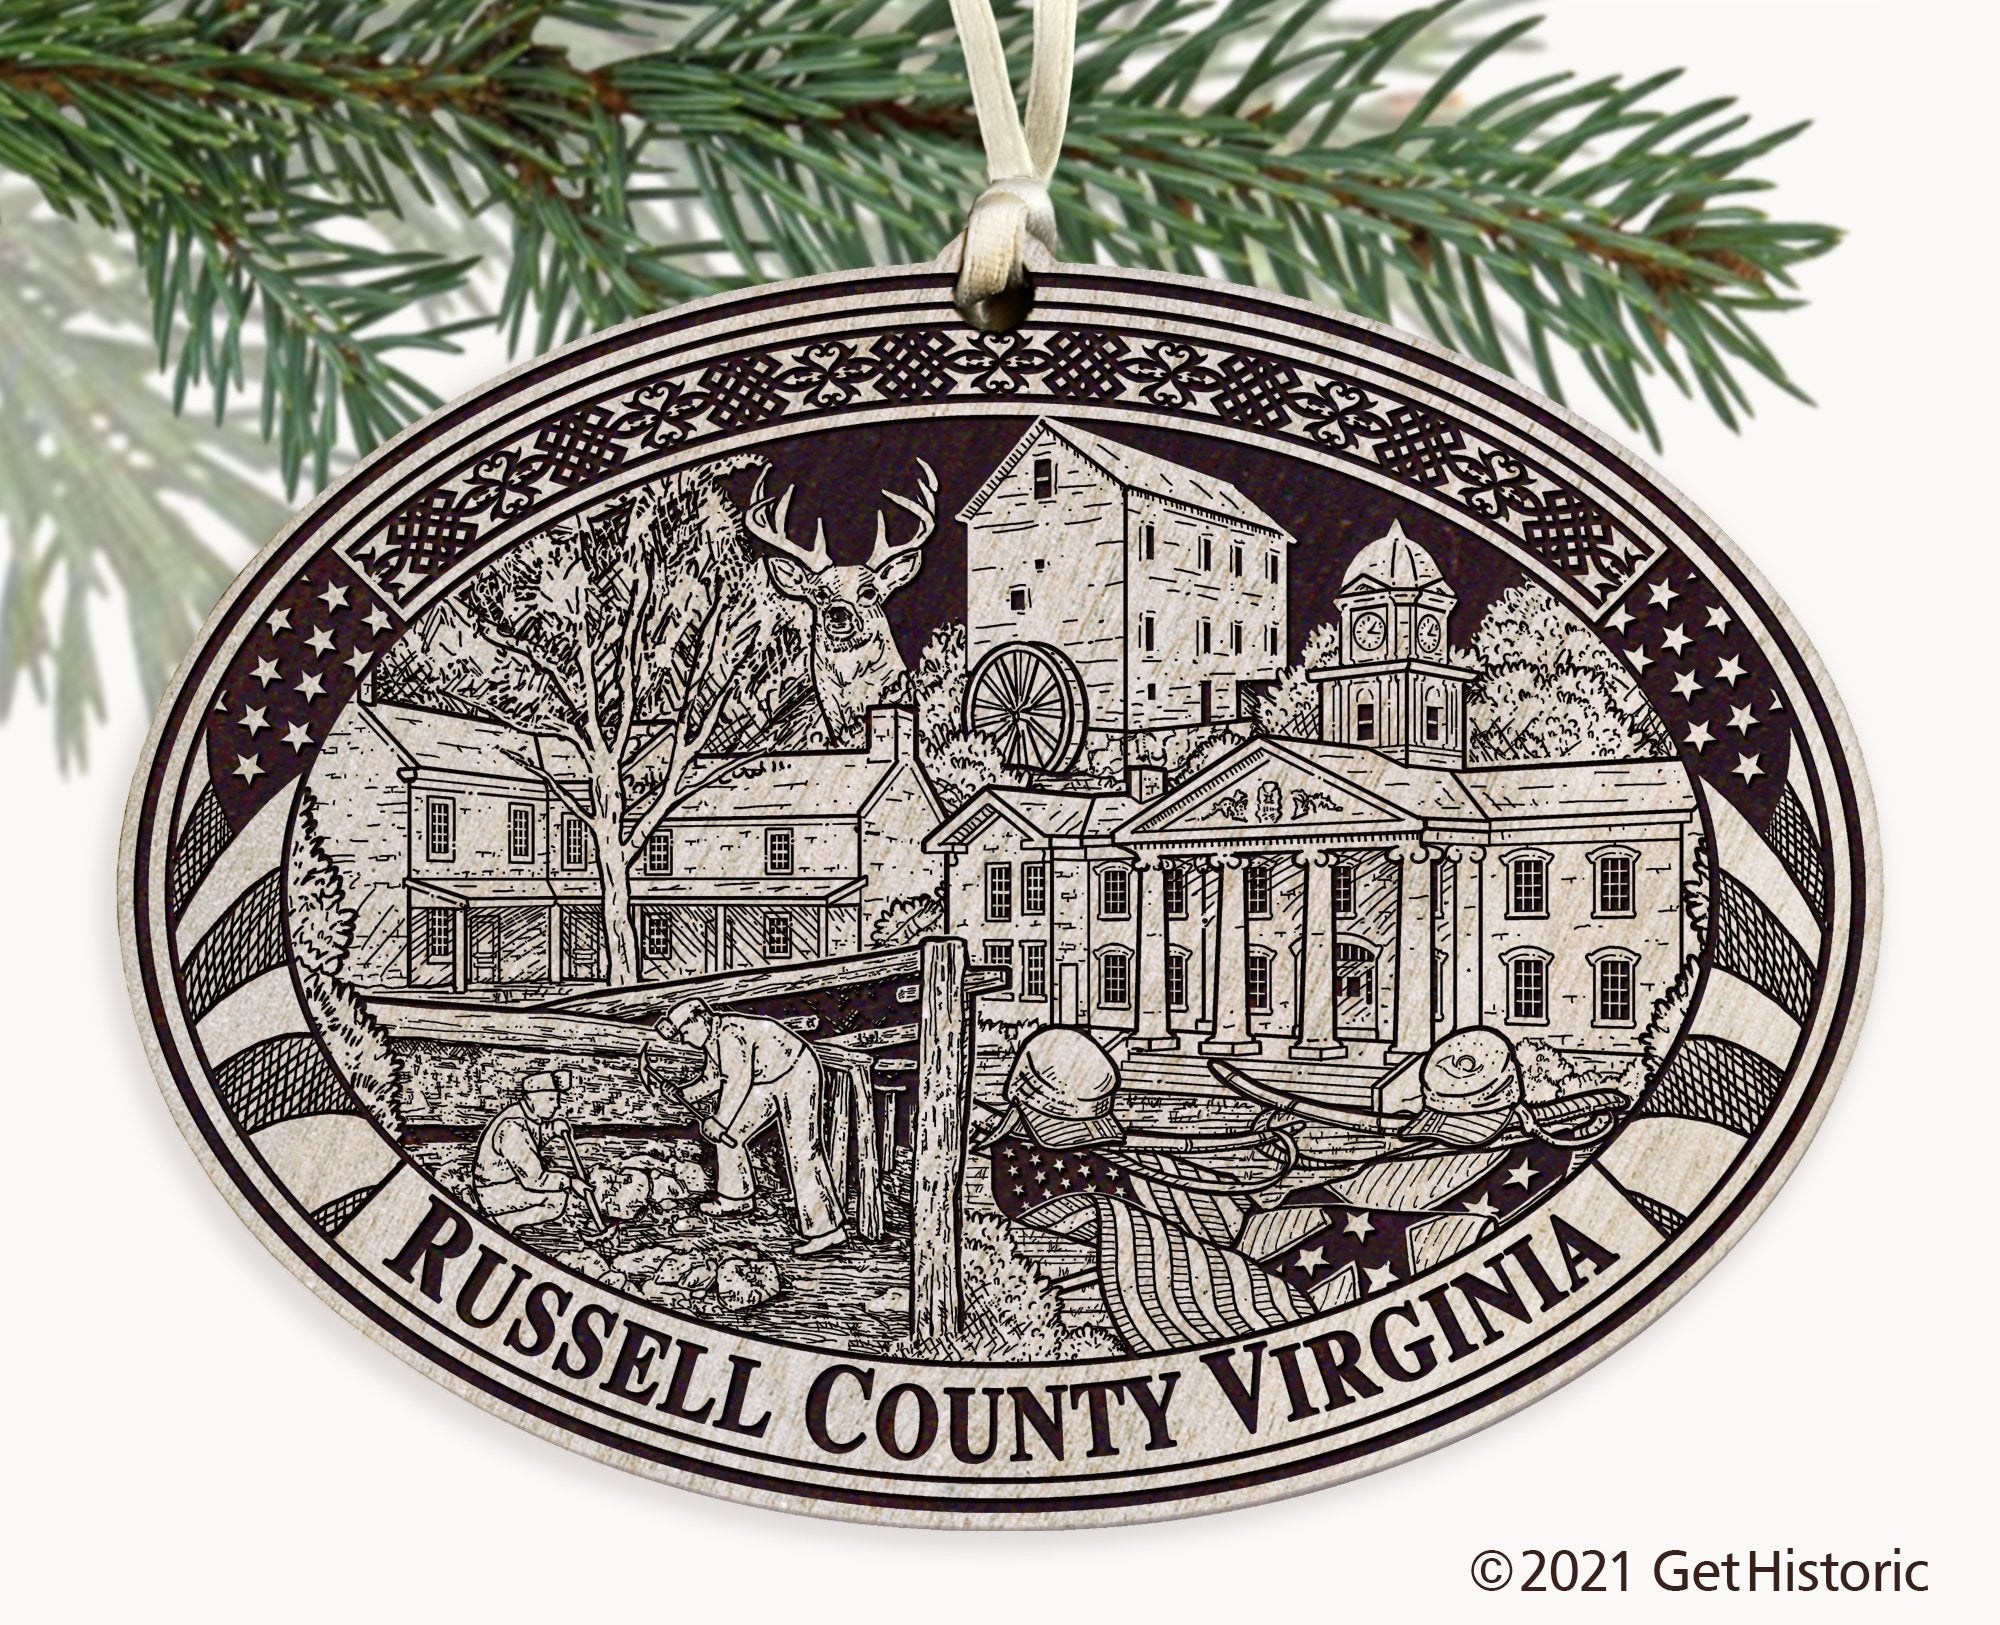 Russell County Virginia Engraved Ornament